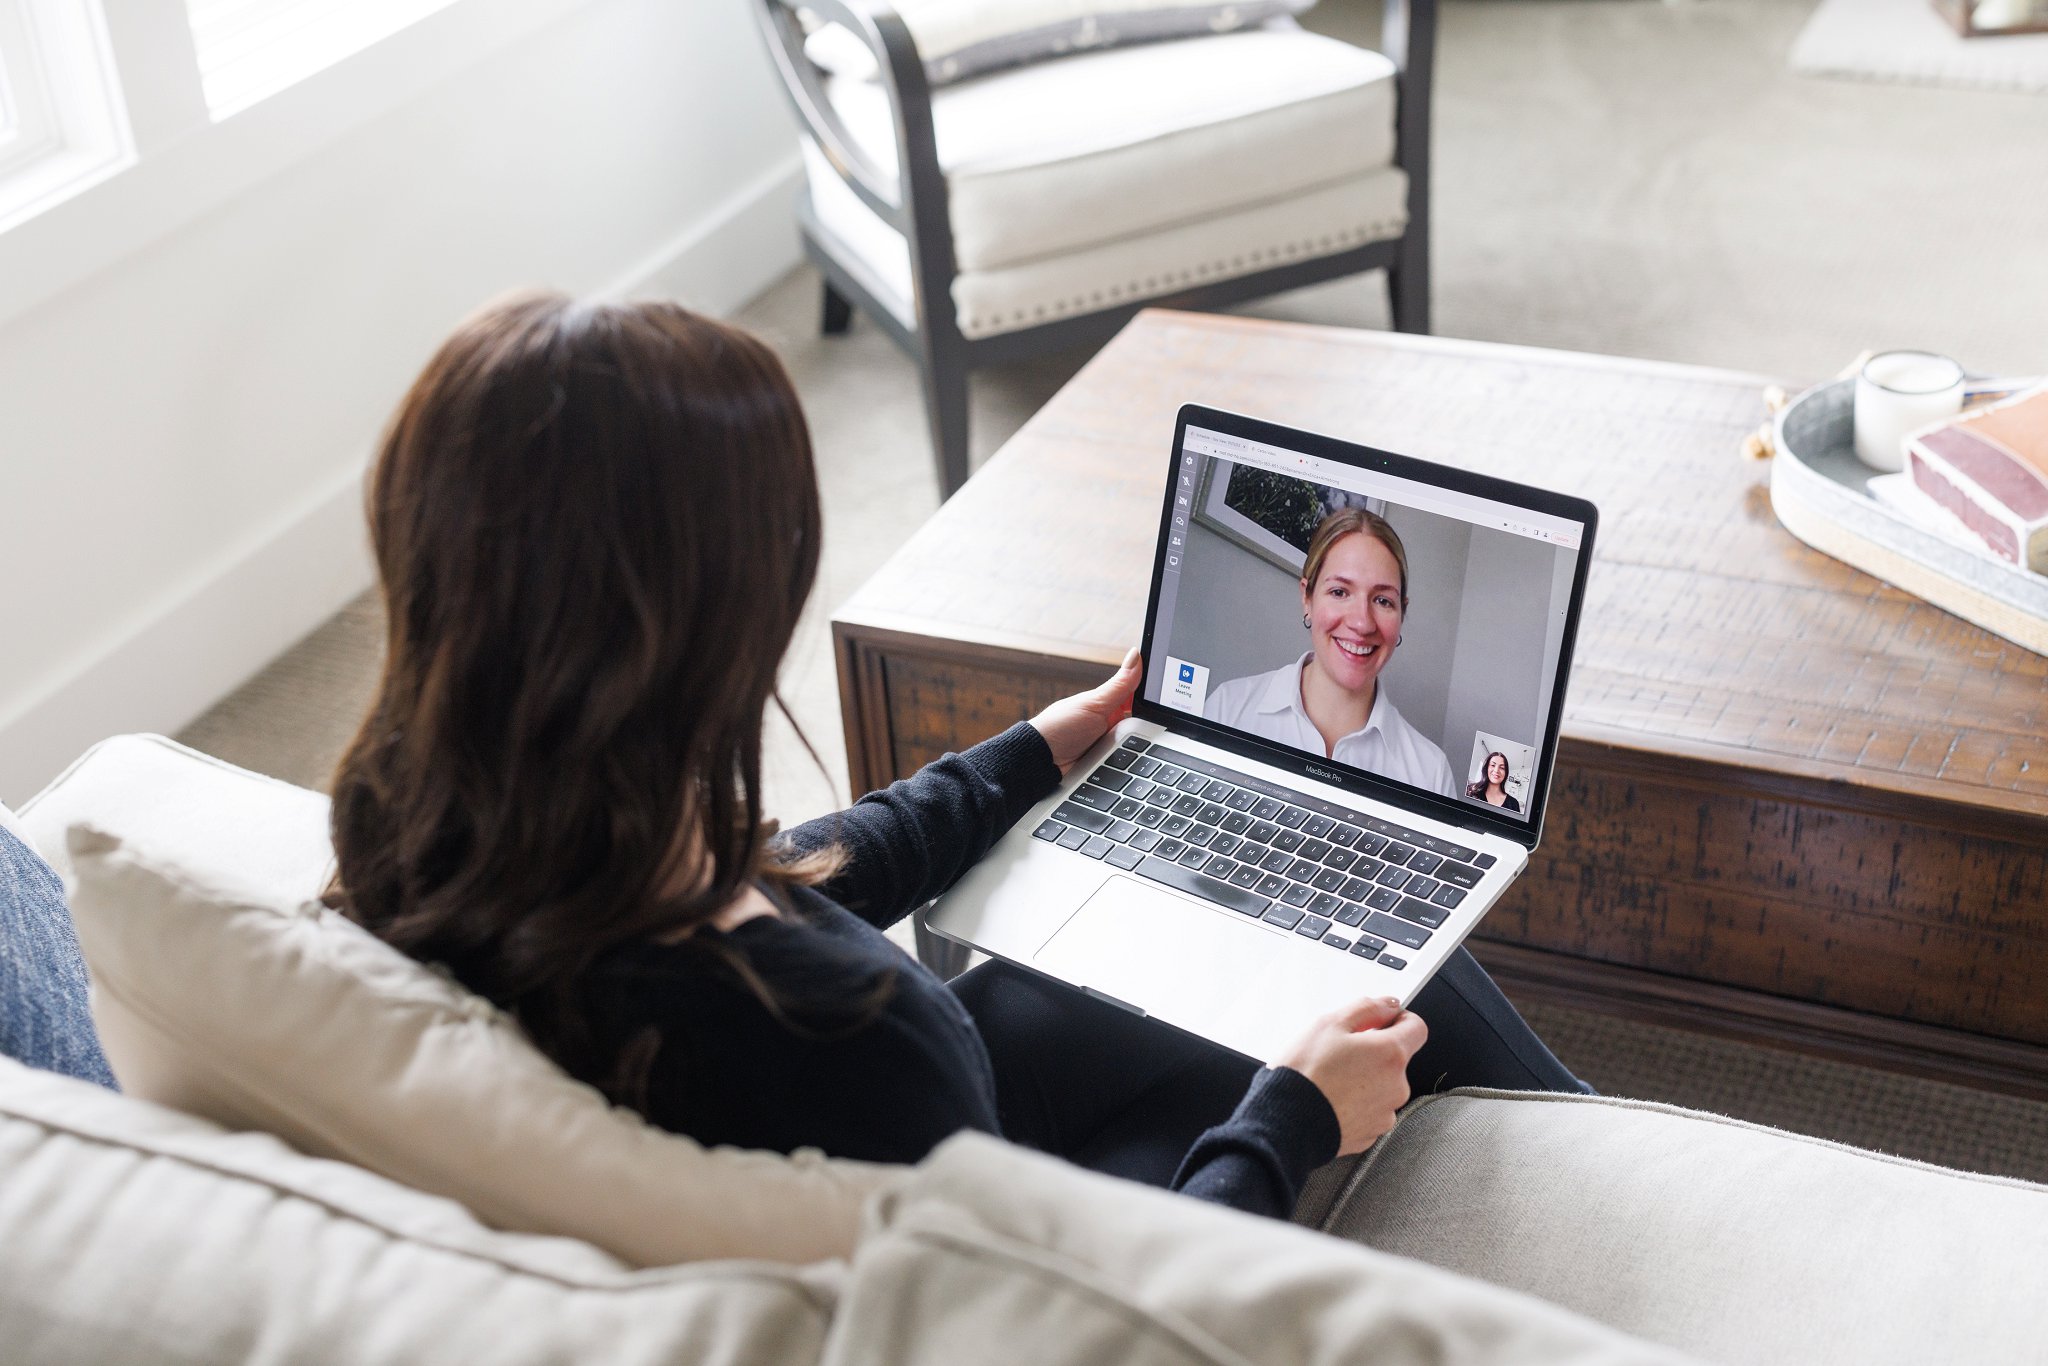 woman sitting on the couch, back to camera, looking at laptop screen, on the screen blonde woman smiling